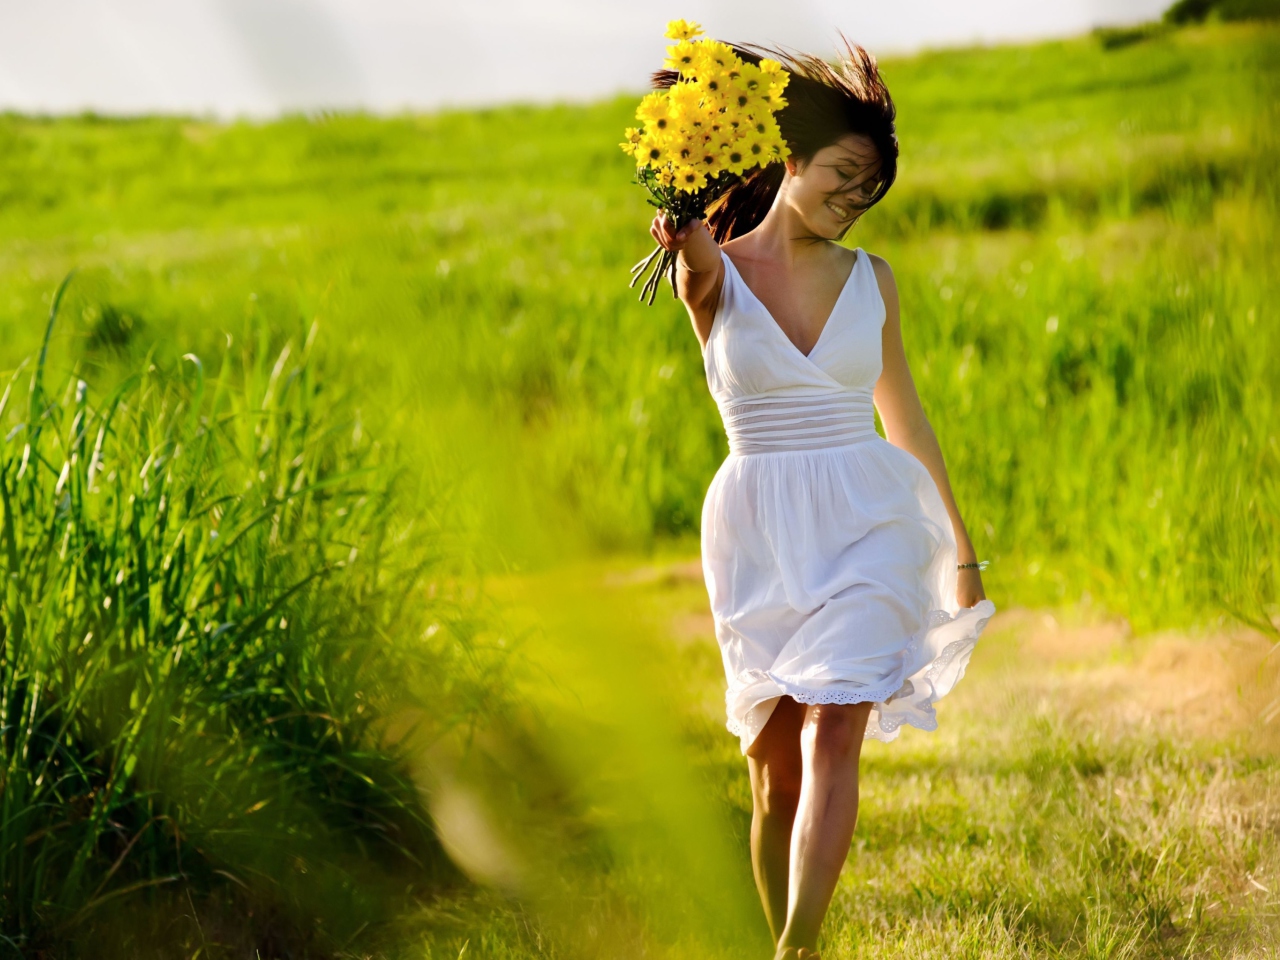 Girl With Yellow Flowers In Field screenshot #1 1280x960